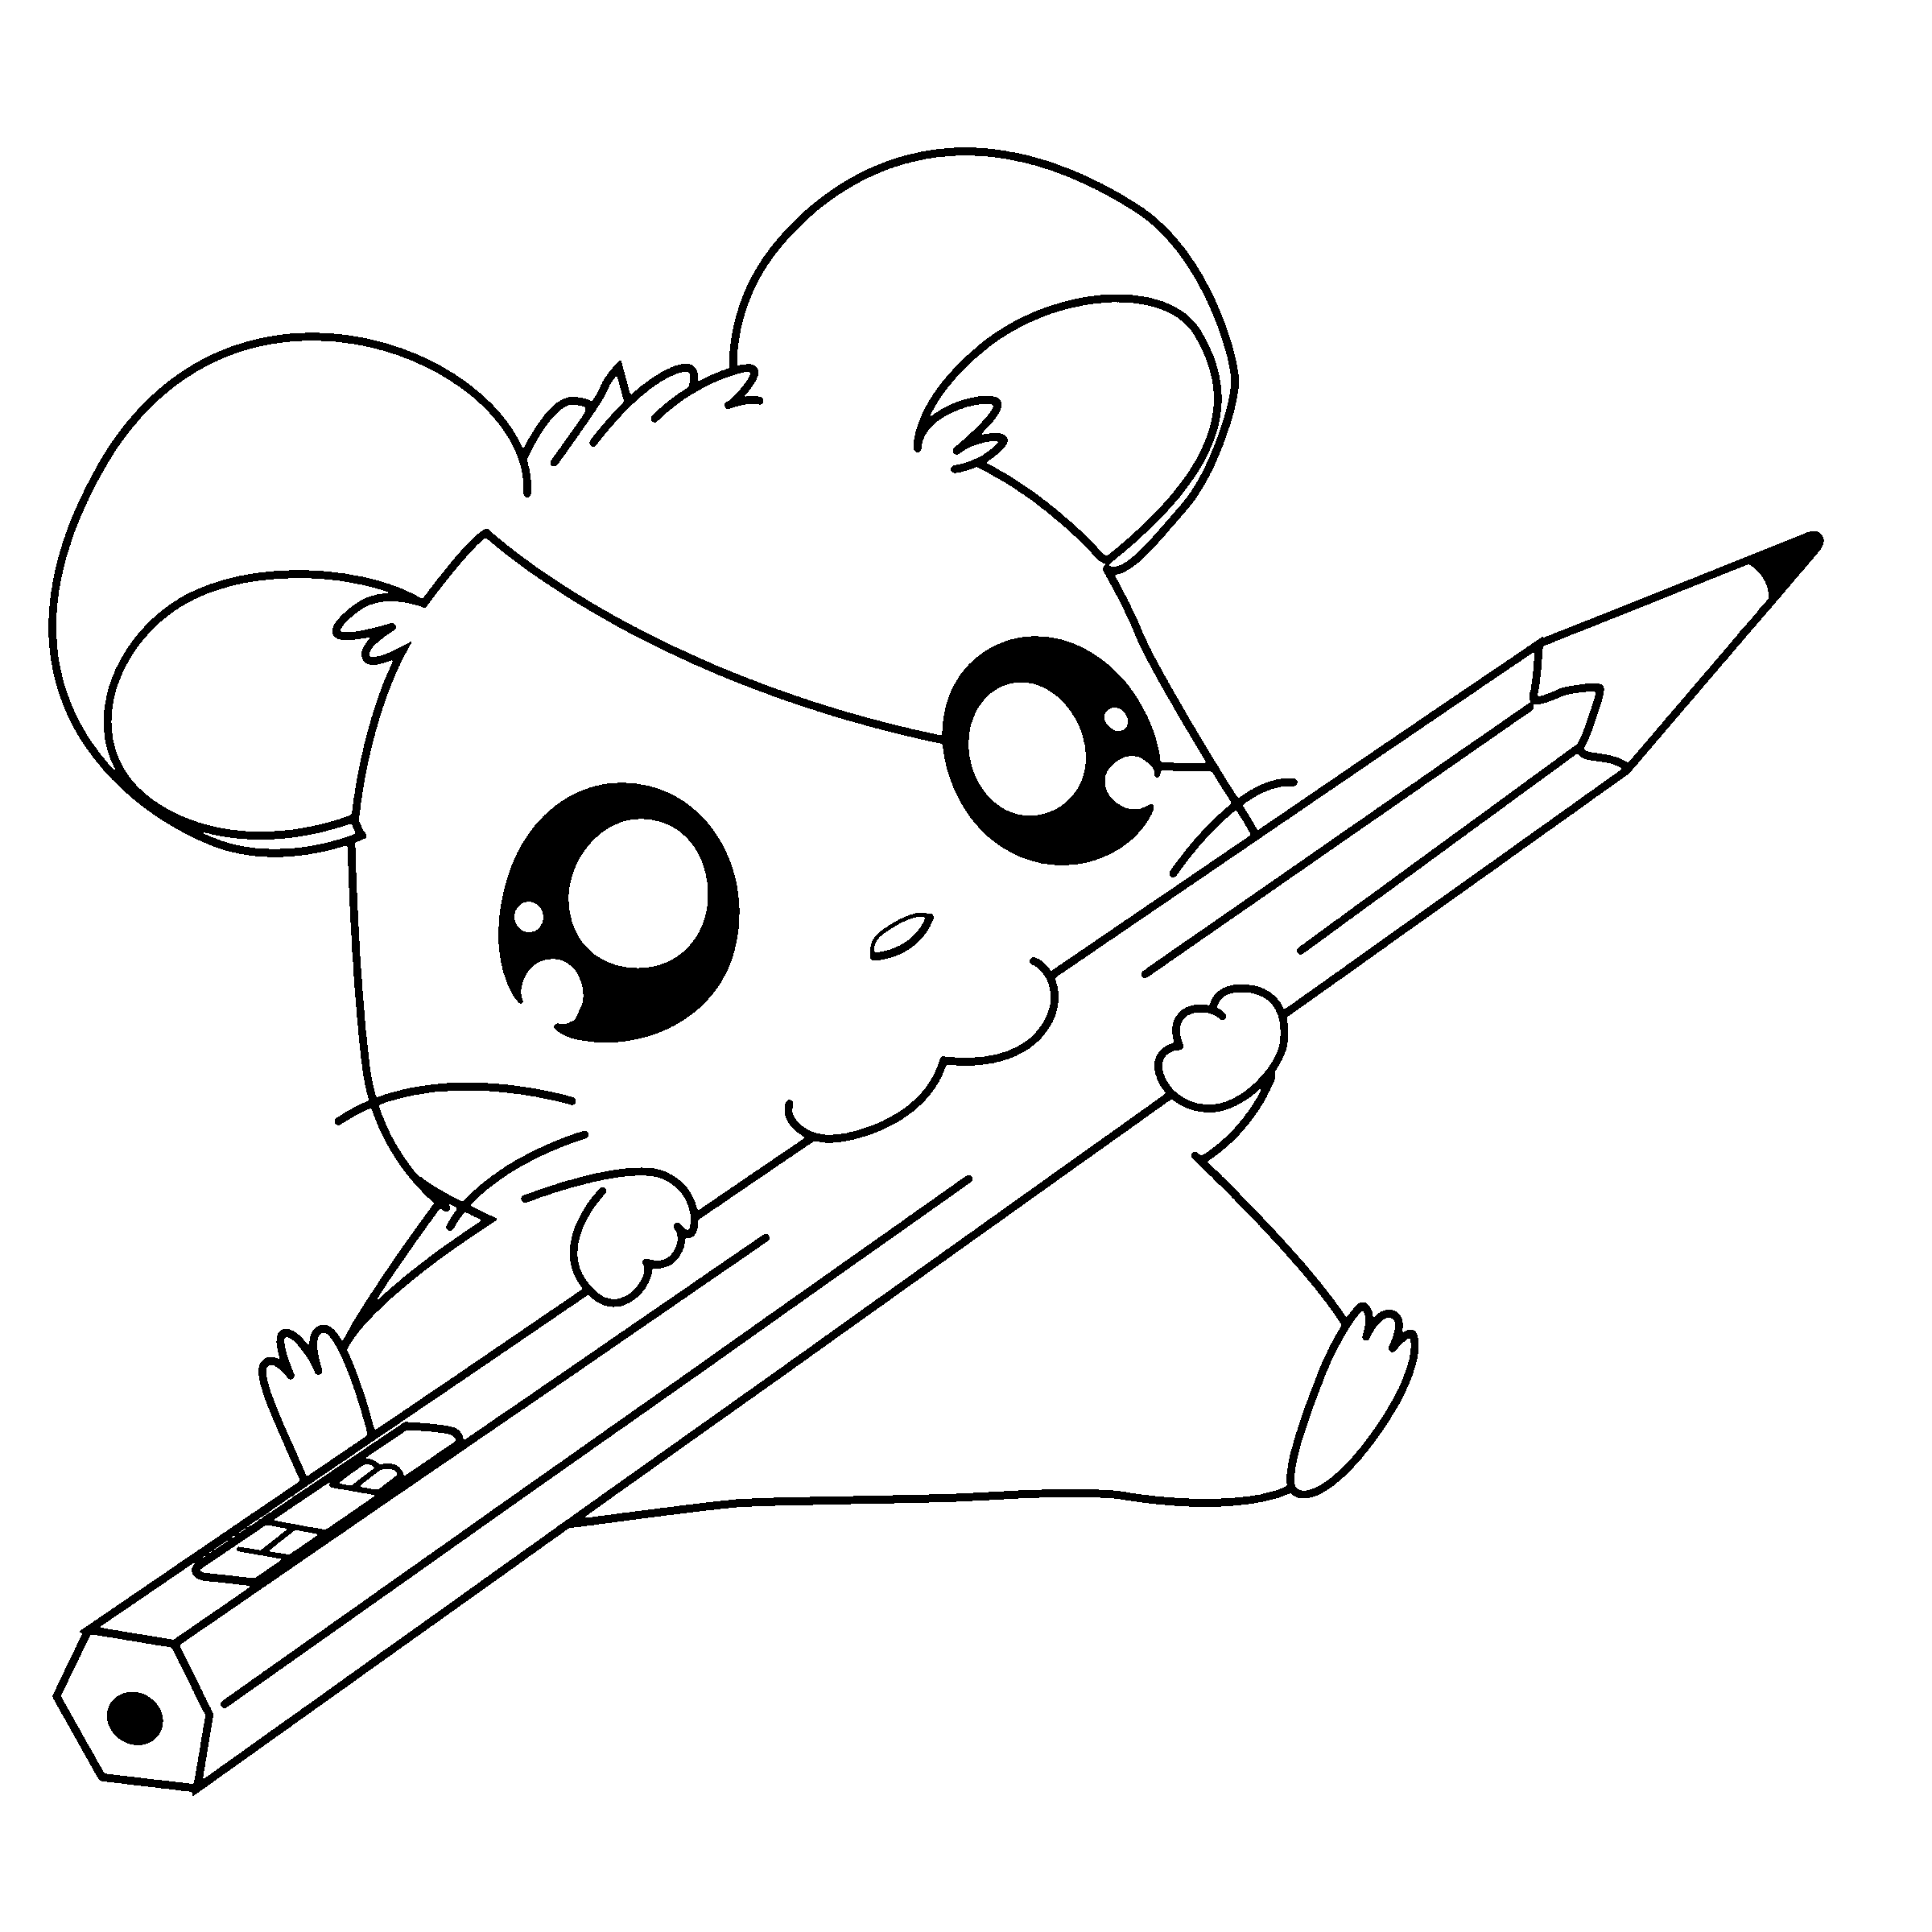 Anime Animals Coloring Pages For Adults   Coloring Home